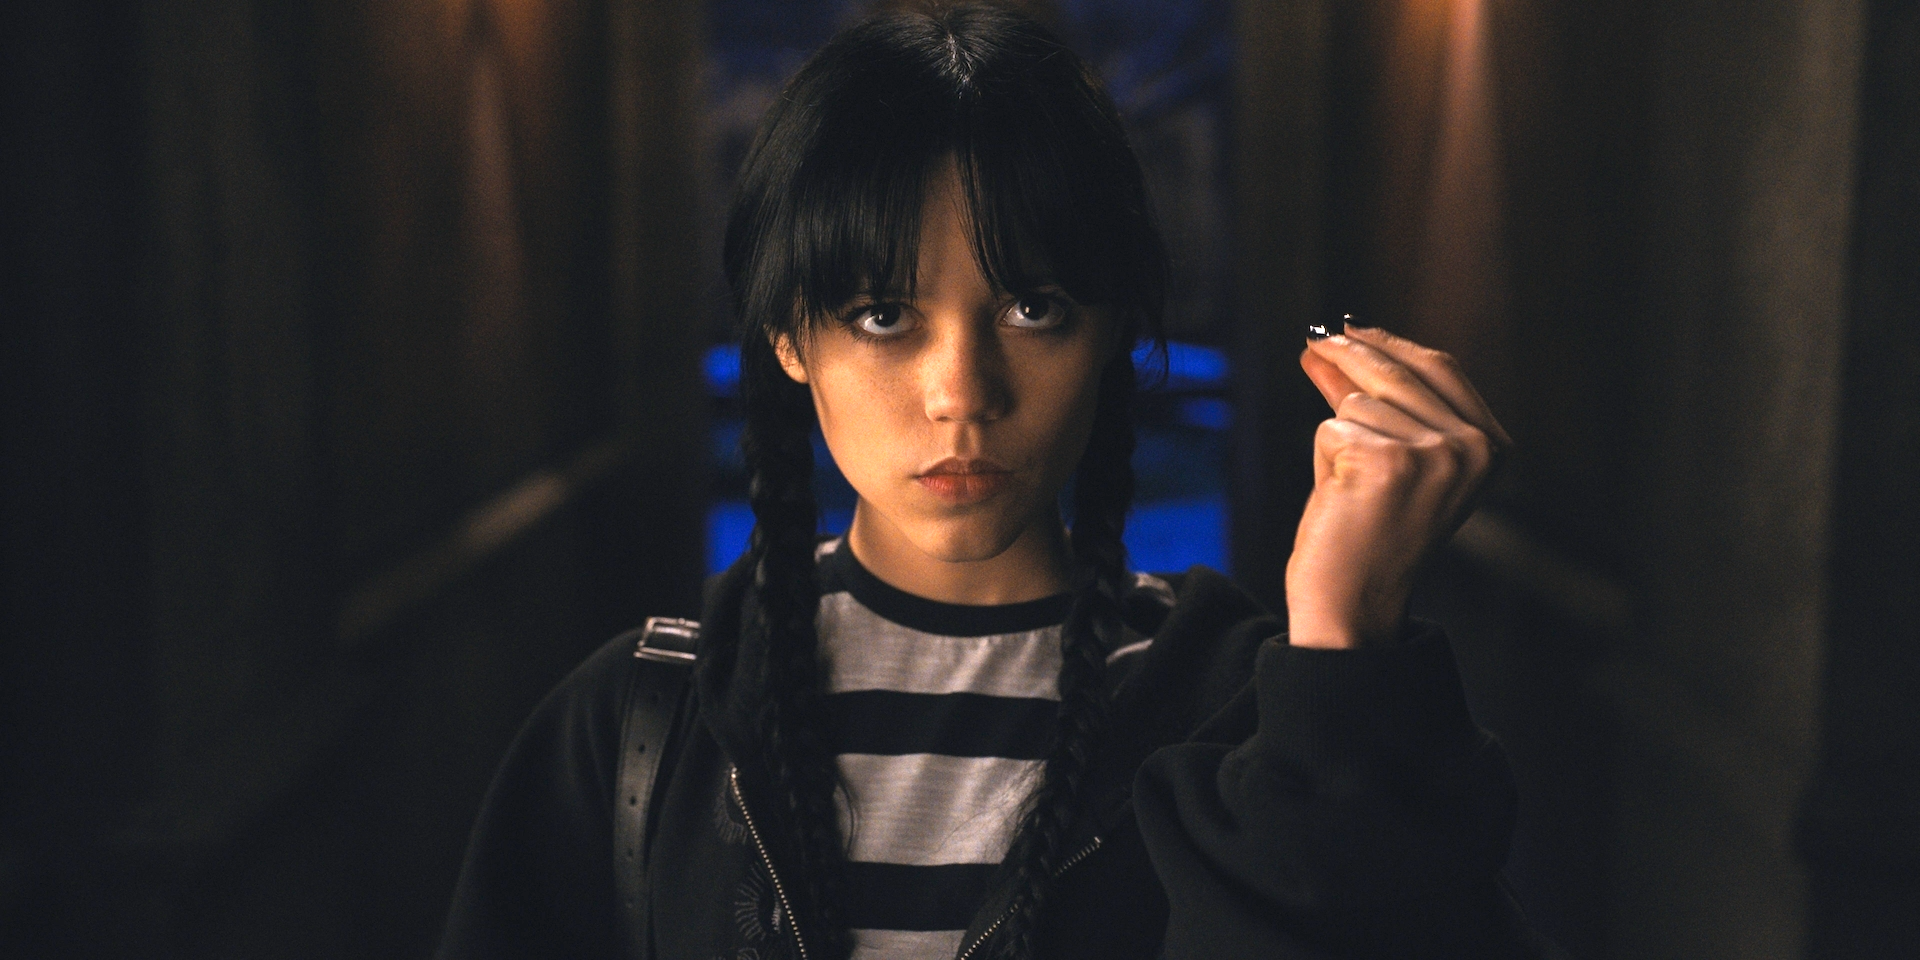 Wednesday Addams: Release date revealed at last for new Netflix